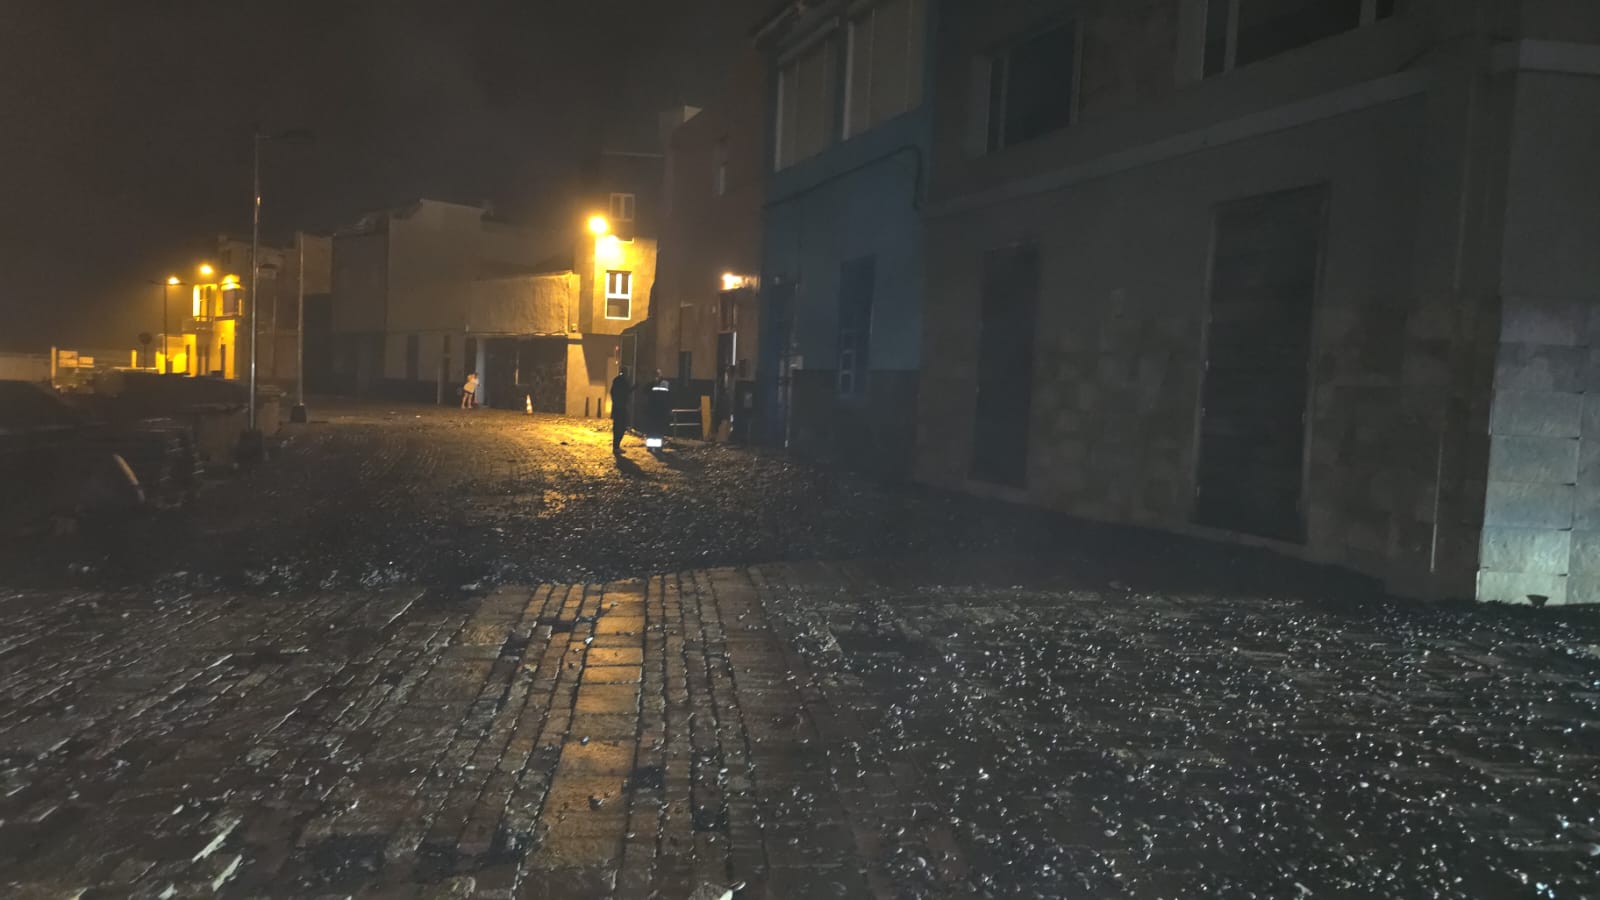 Debris could be seen strewn across the seafront with broken tiles caused by the deluge